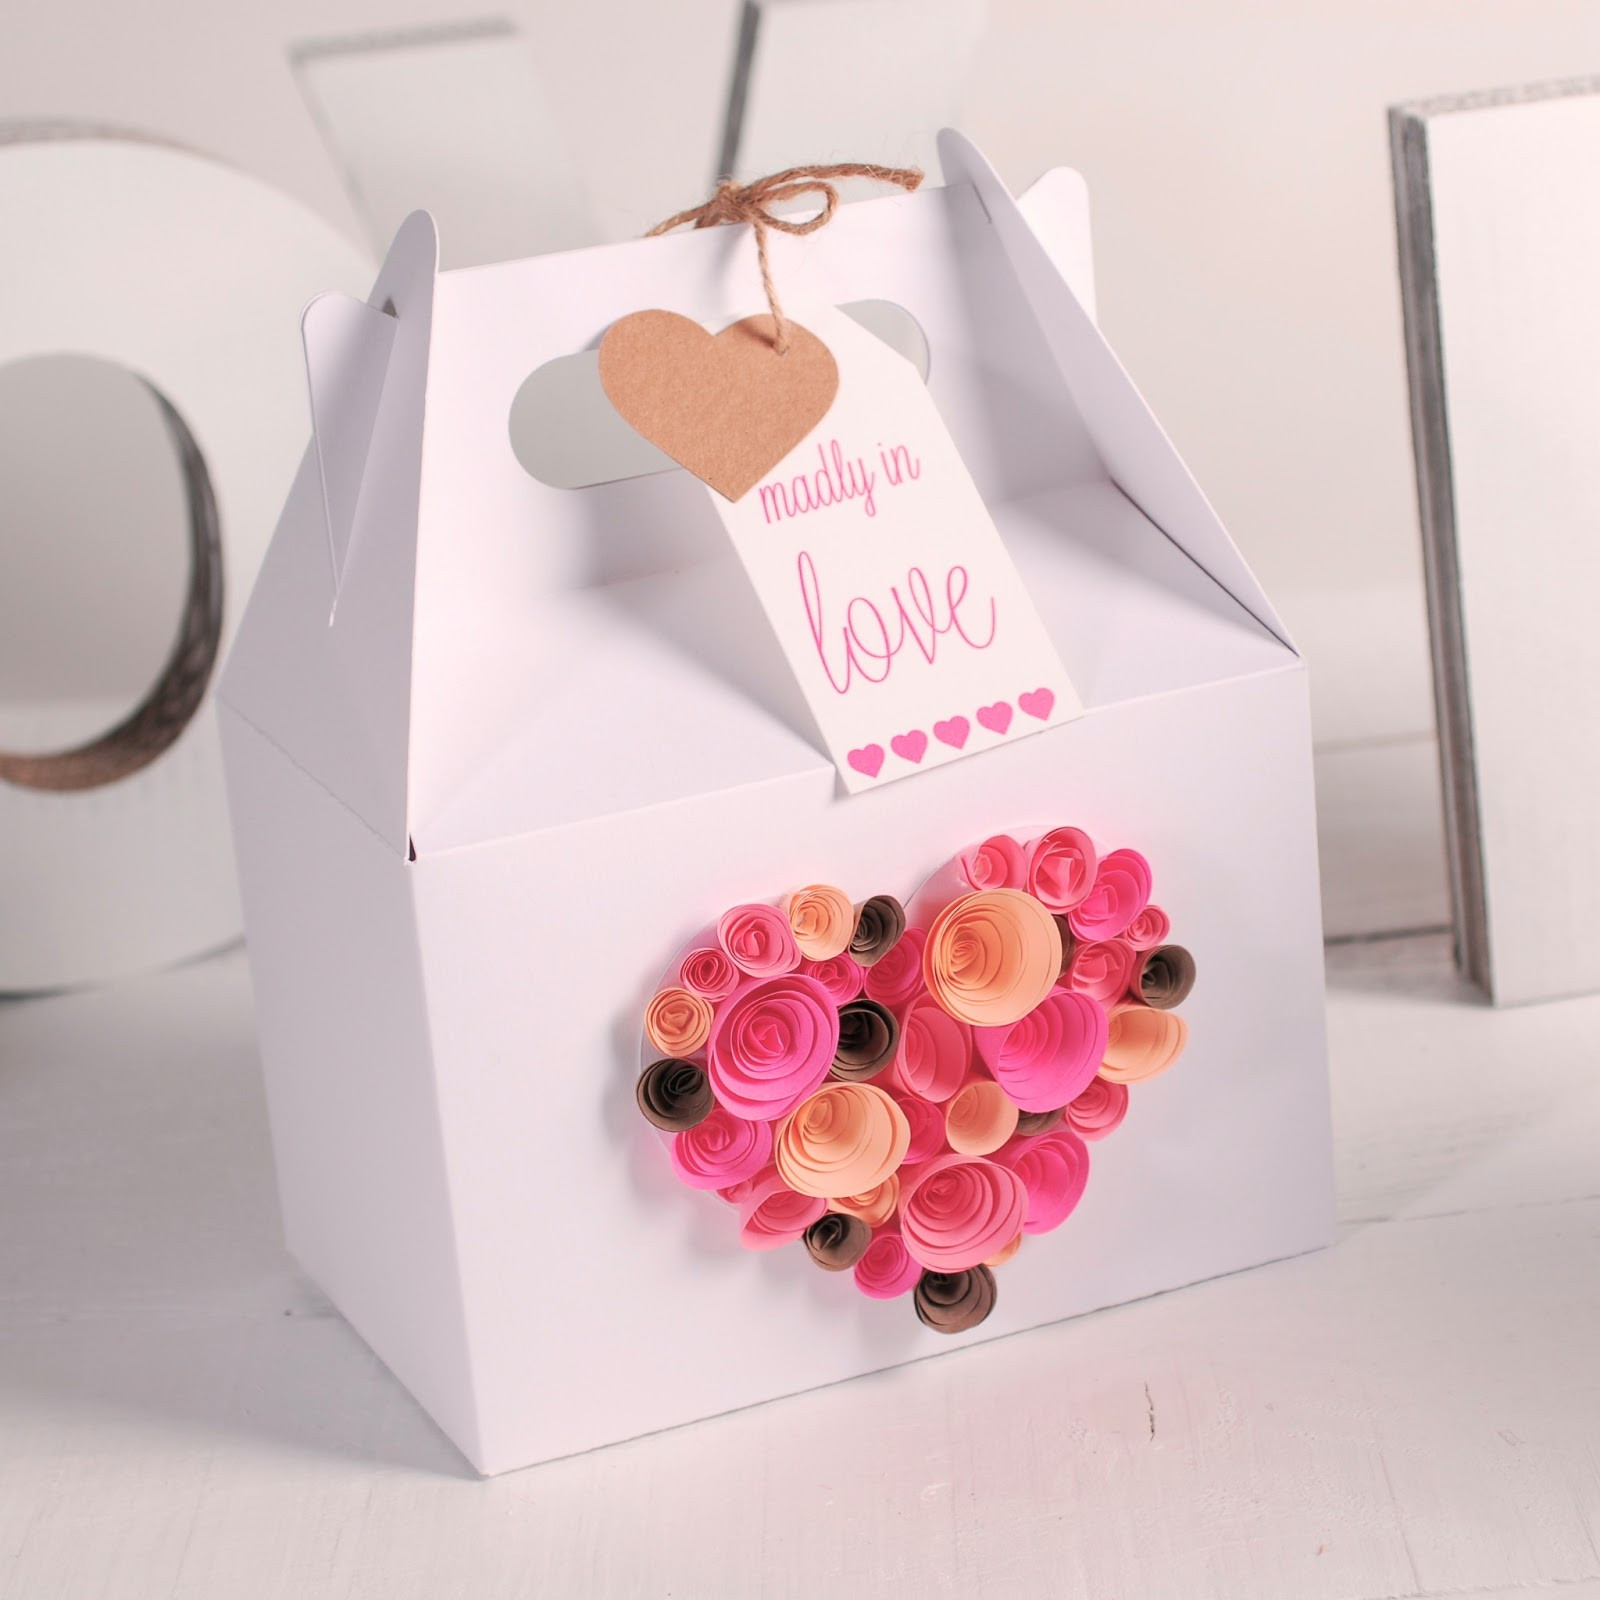 Valentine Day Gift Box Ideas
 Gift wrapping ideas for Valentines Day How to decorate a